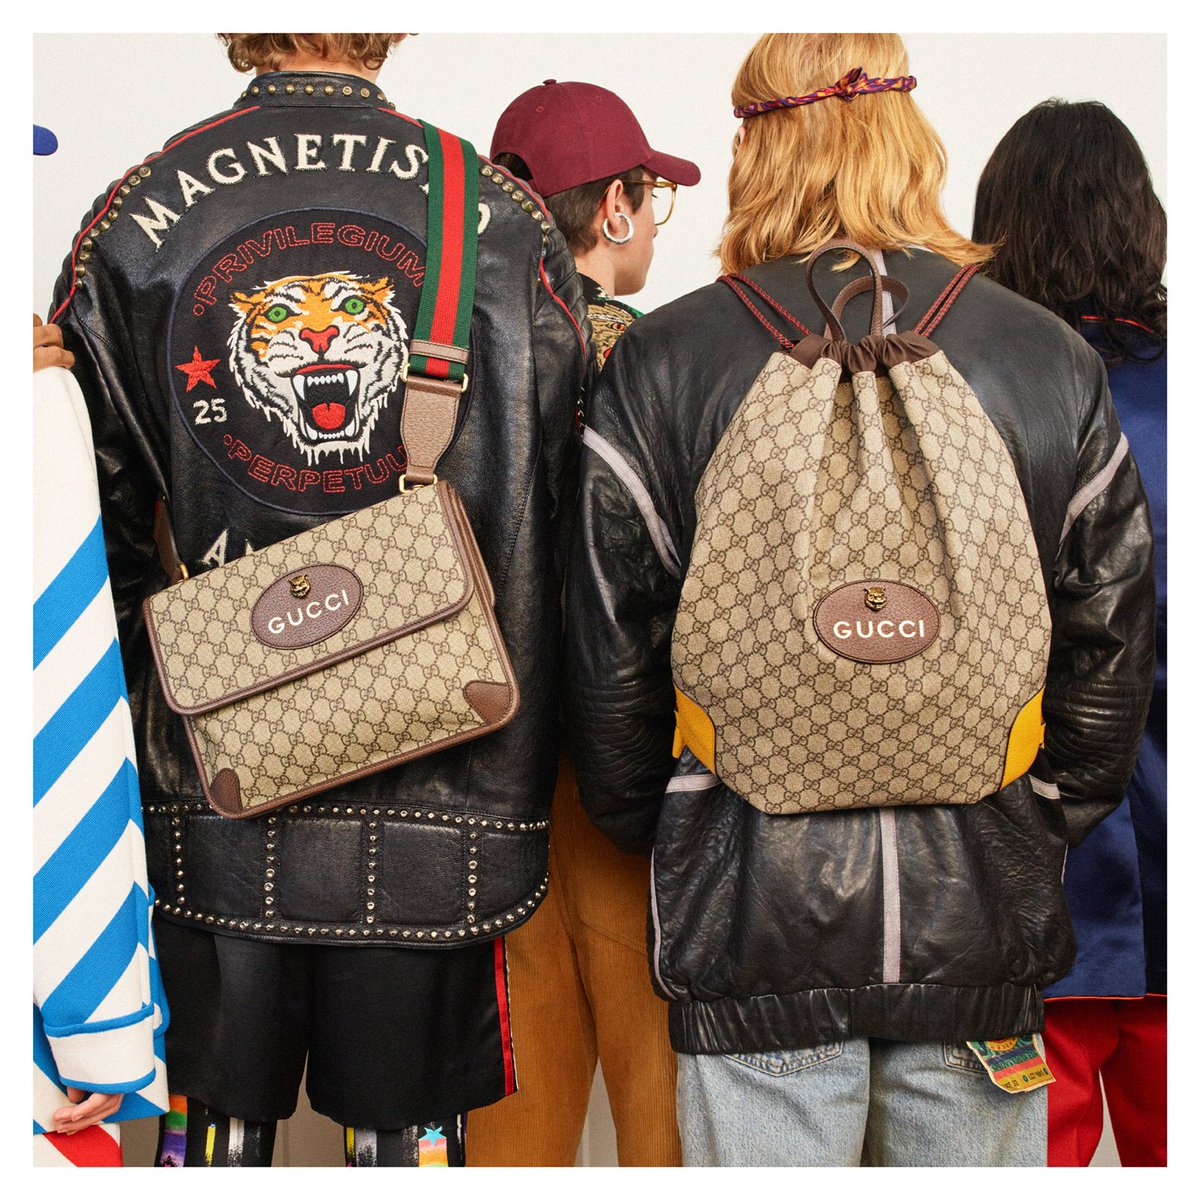 gucci på Twitter: "The GG motif men's accessories including a drawstring backpack and a messenger bag with House Web stripe strap, from #GucciPreFall18 by #AlessandroMichele. https://t.co/zcZYKTvqWo" / Twitter